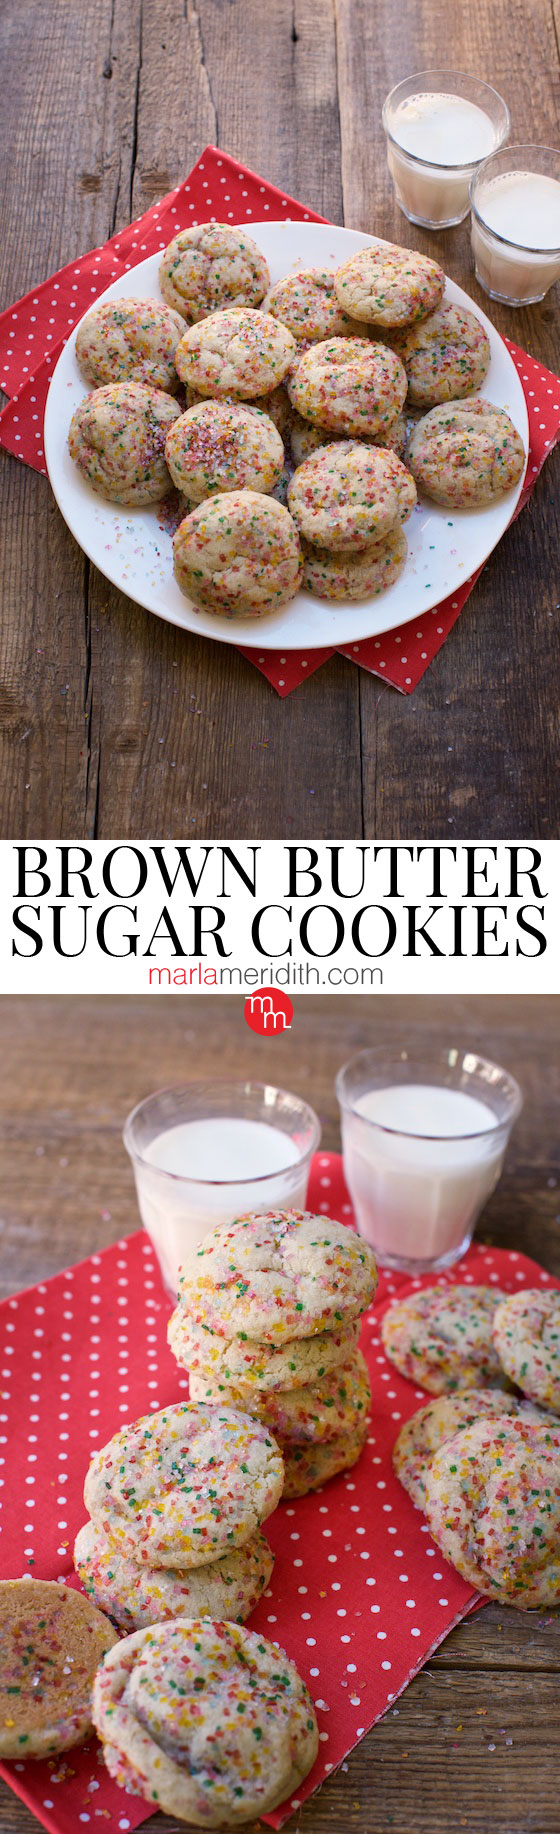 For the holidays bake a few batches of these Brown Butter Sugar Cookies! Get the #recipe on MarlaMeridith.com #cookies #christmas